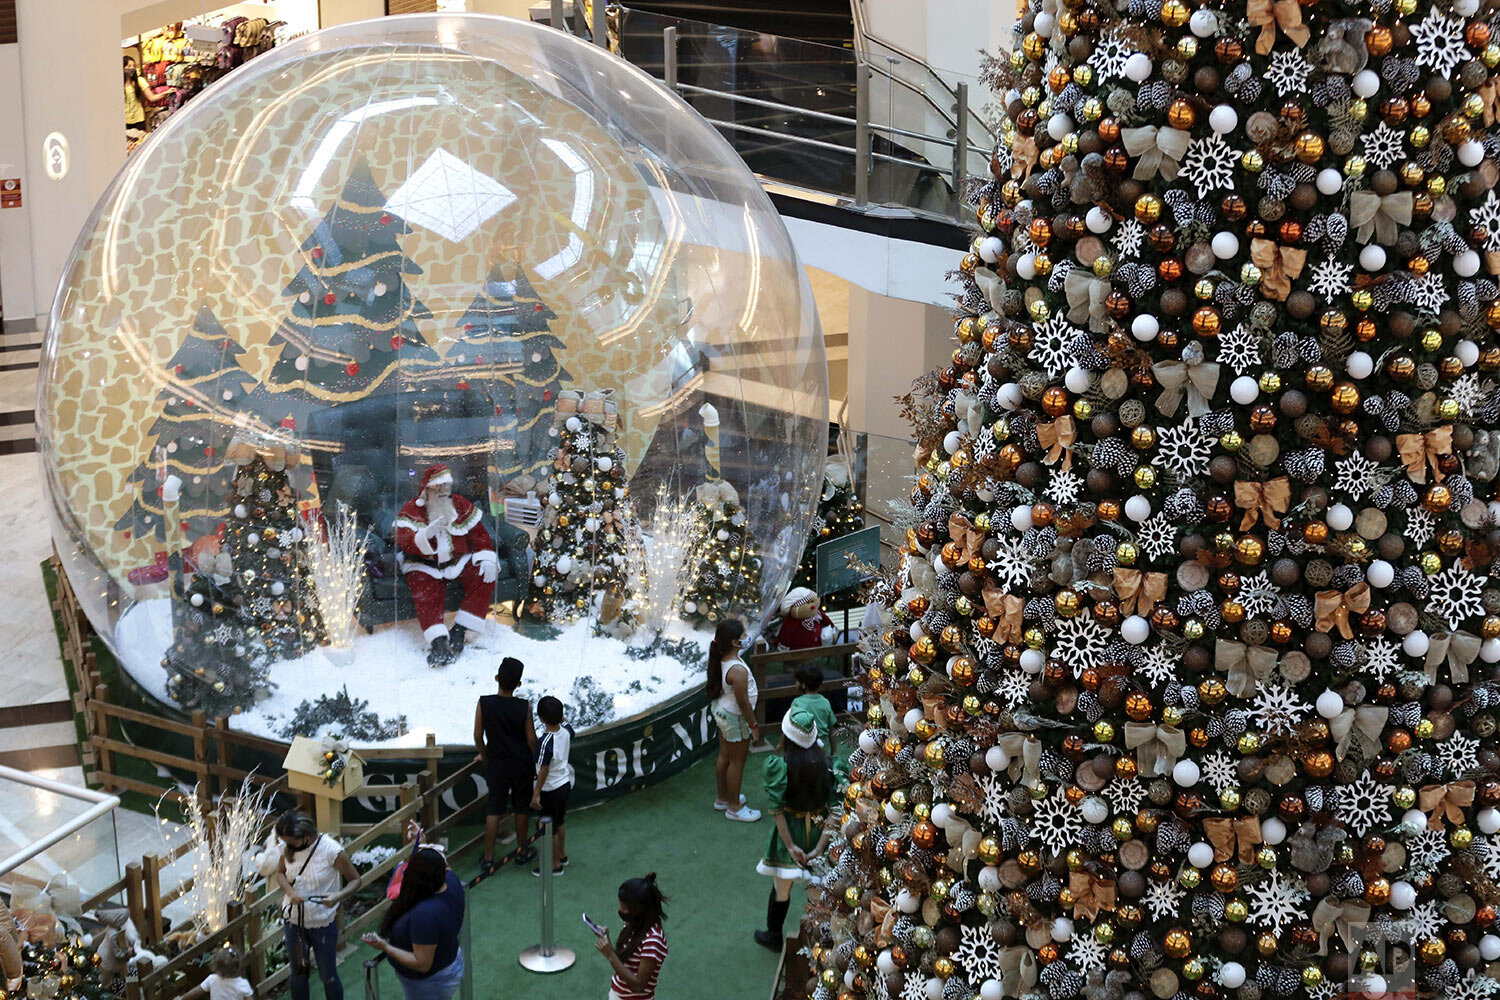  Santa Claus performer Abilio Nunes greets a child from inside a life-size snow globe, as a protective measure amid the spread of COVID-19, at a shopping center in Brasilia, Brazil, Wednesday, Dec. 16, 2020. (AP Photo/Eraldo Peres) 